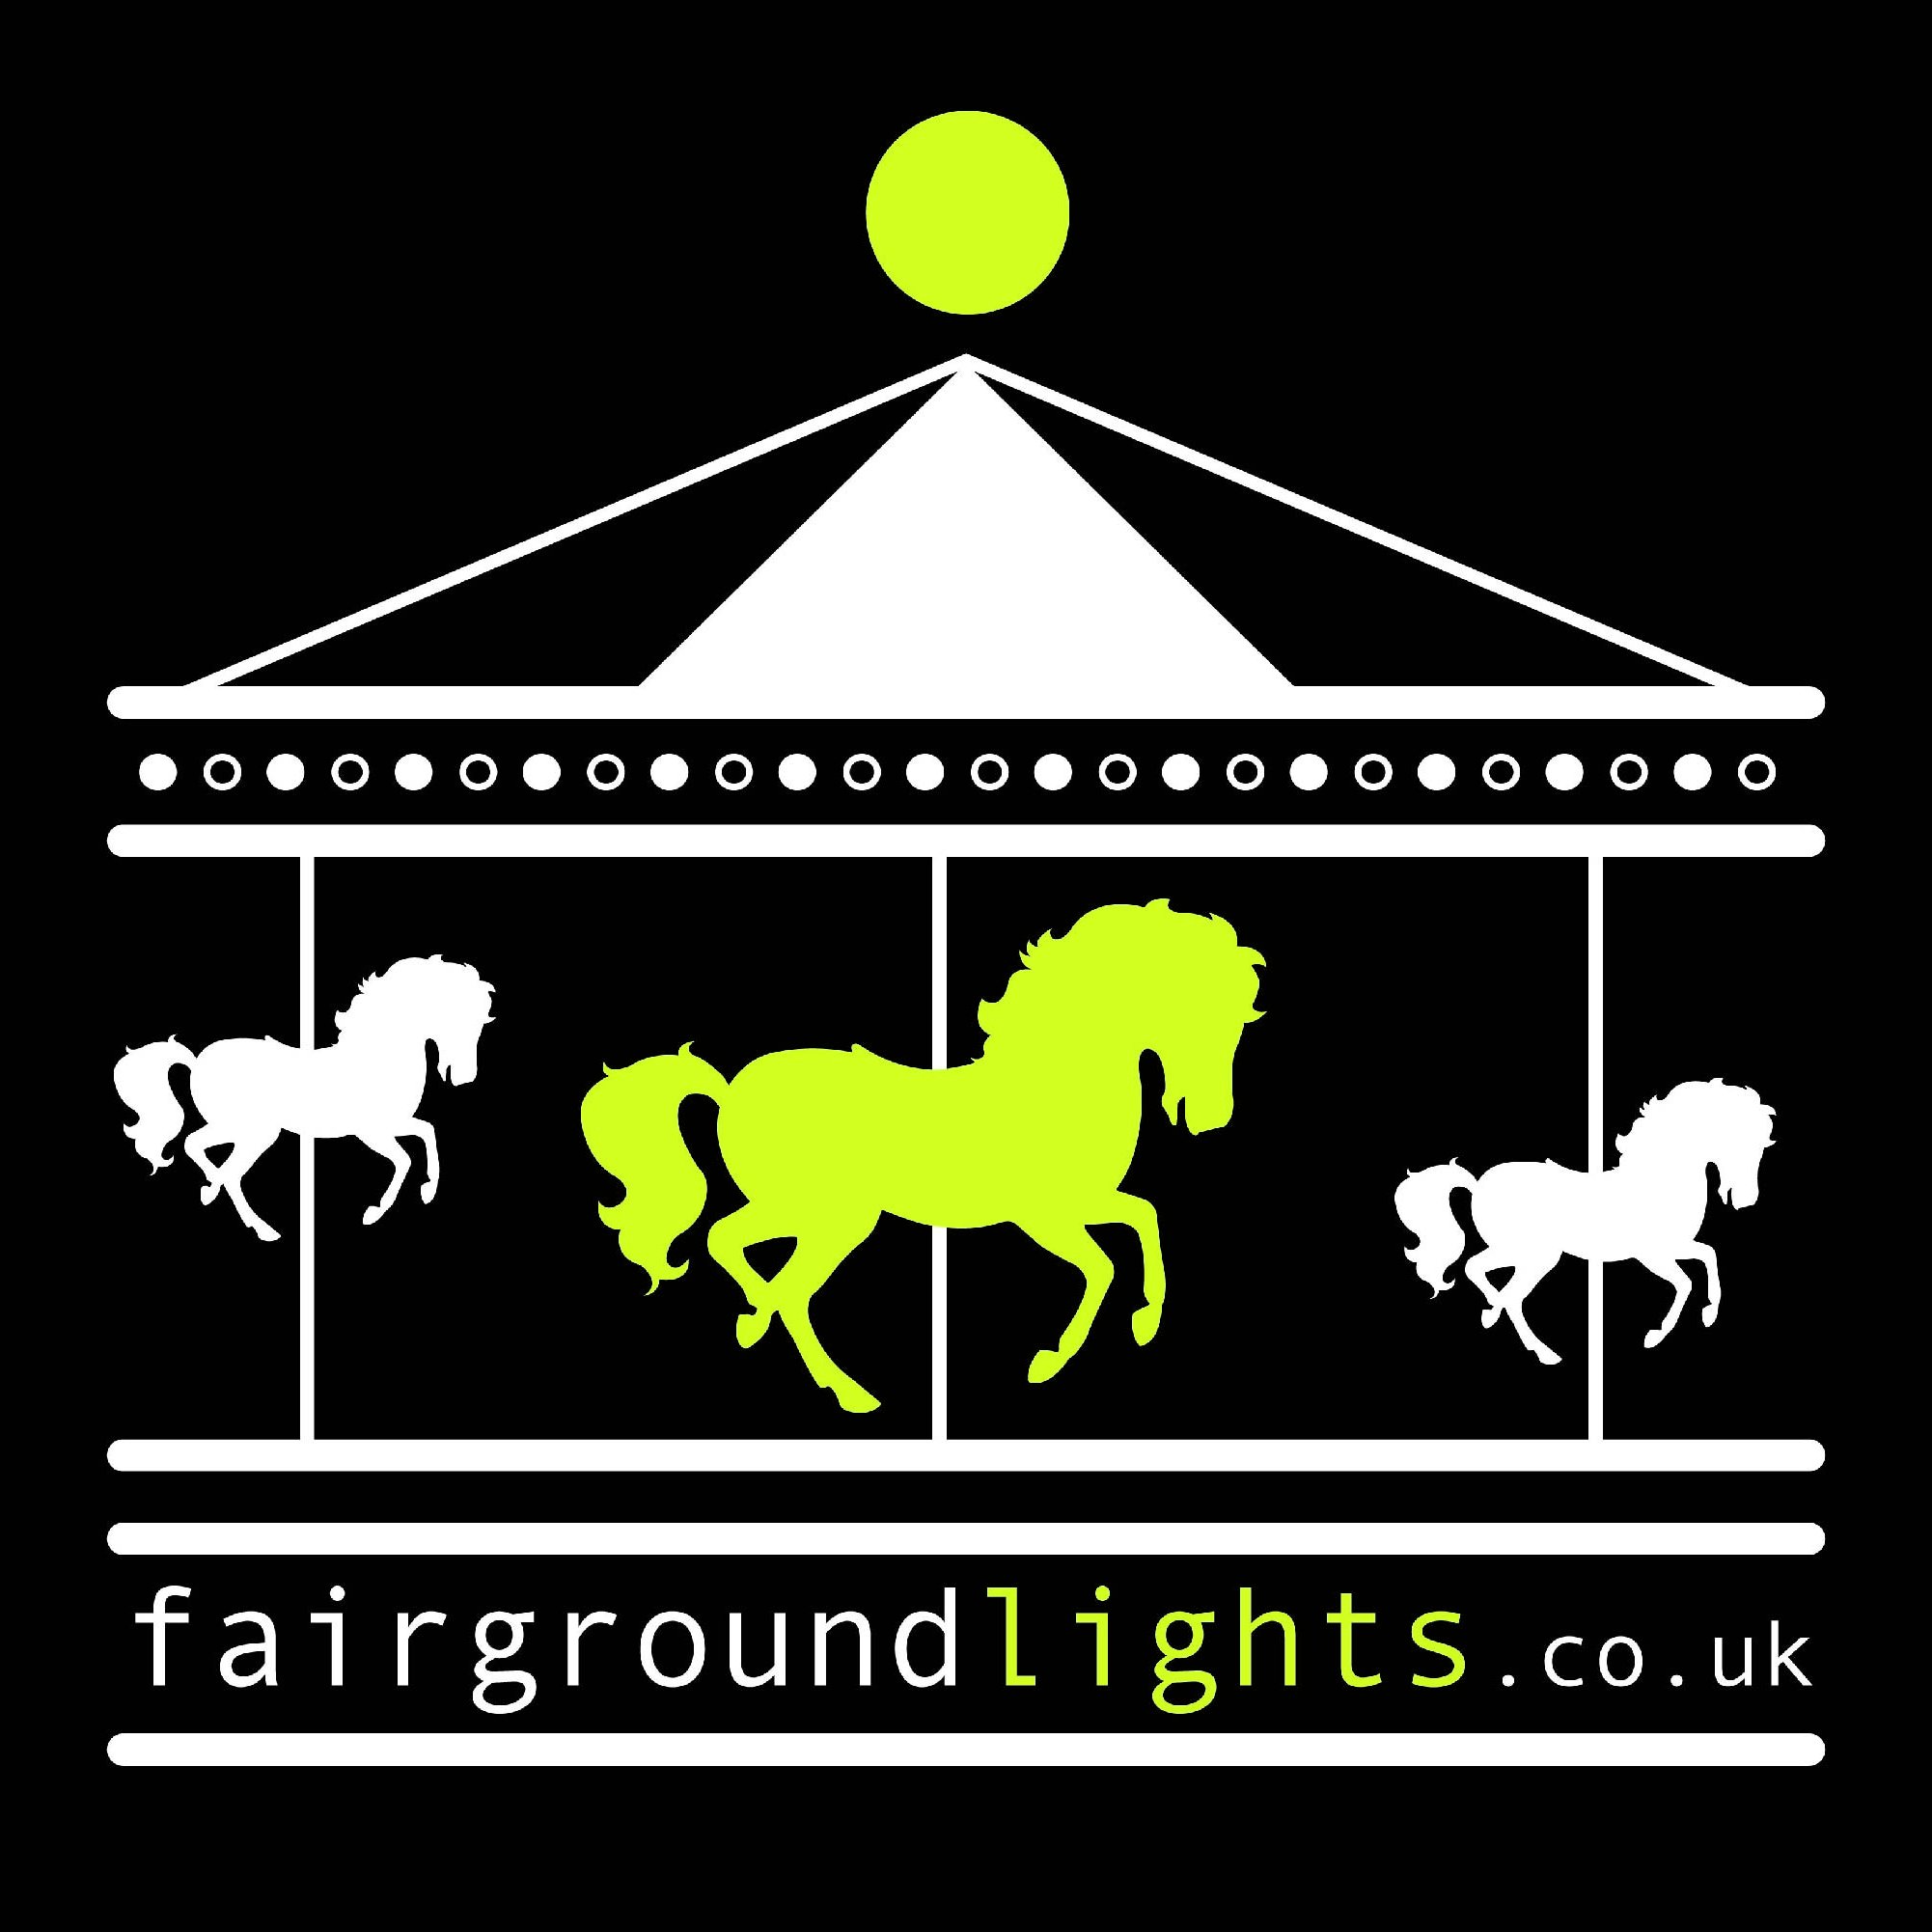 C/O Leisure Lites Ltd - Fairground Lights, experts in Cabochon lighting and illumination works for a broad range of industries throughout the UK.